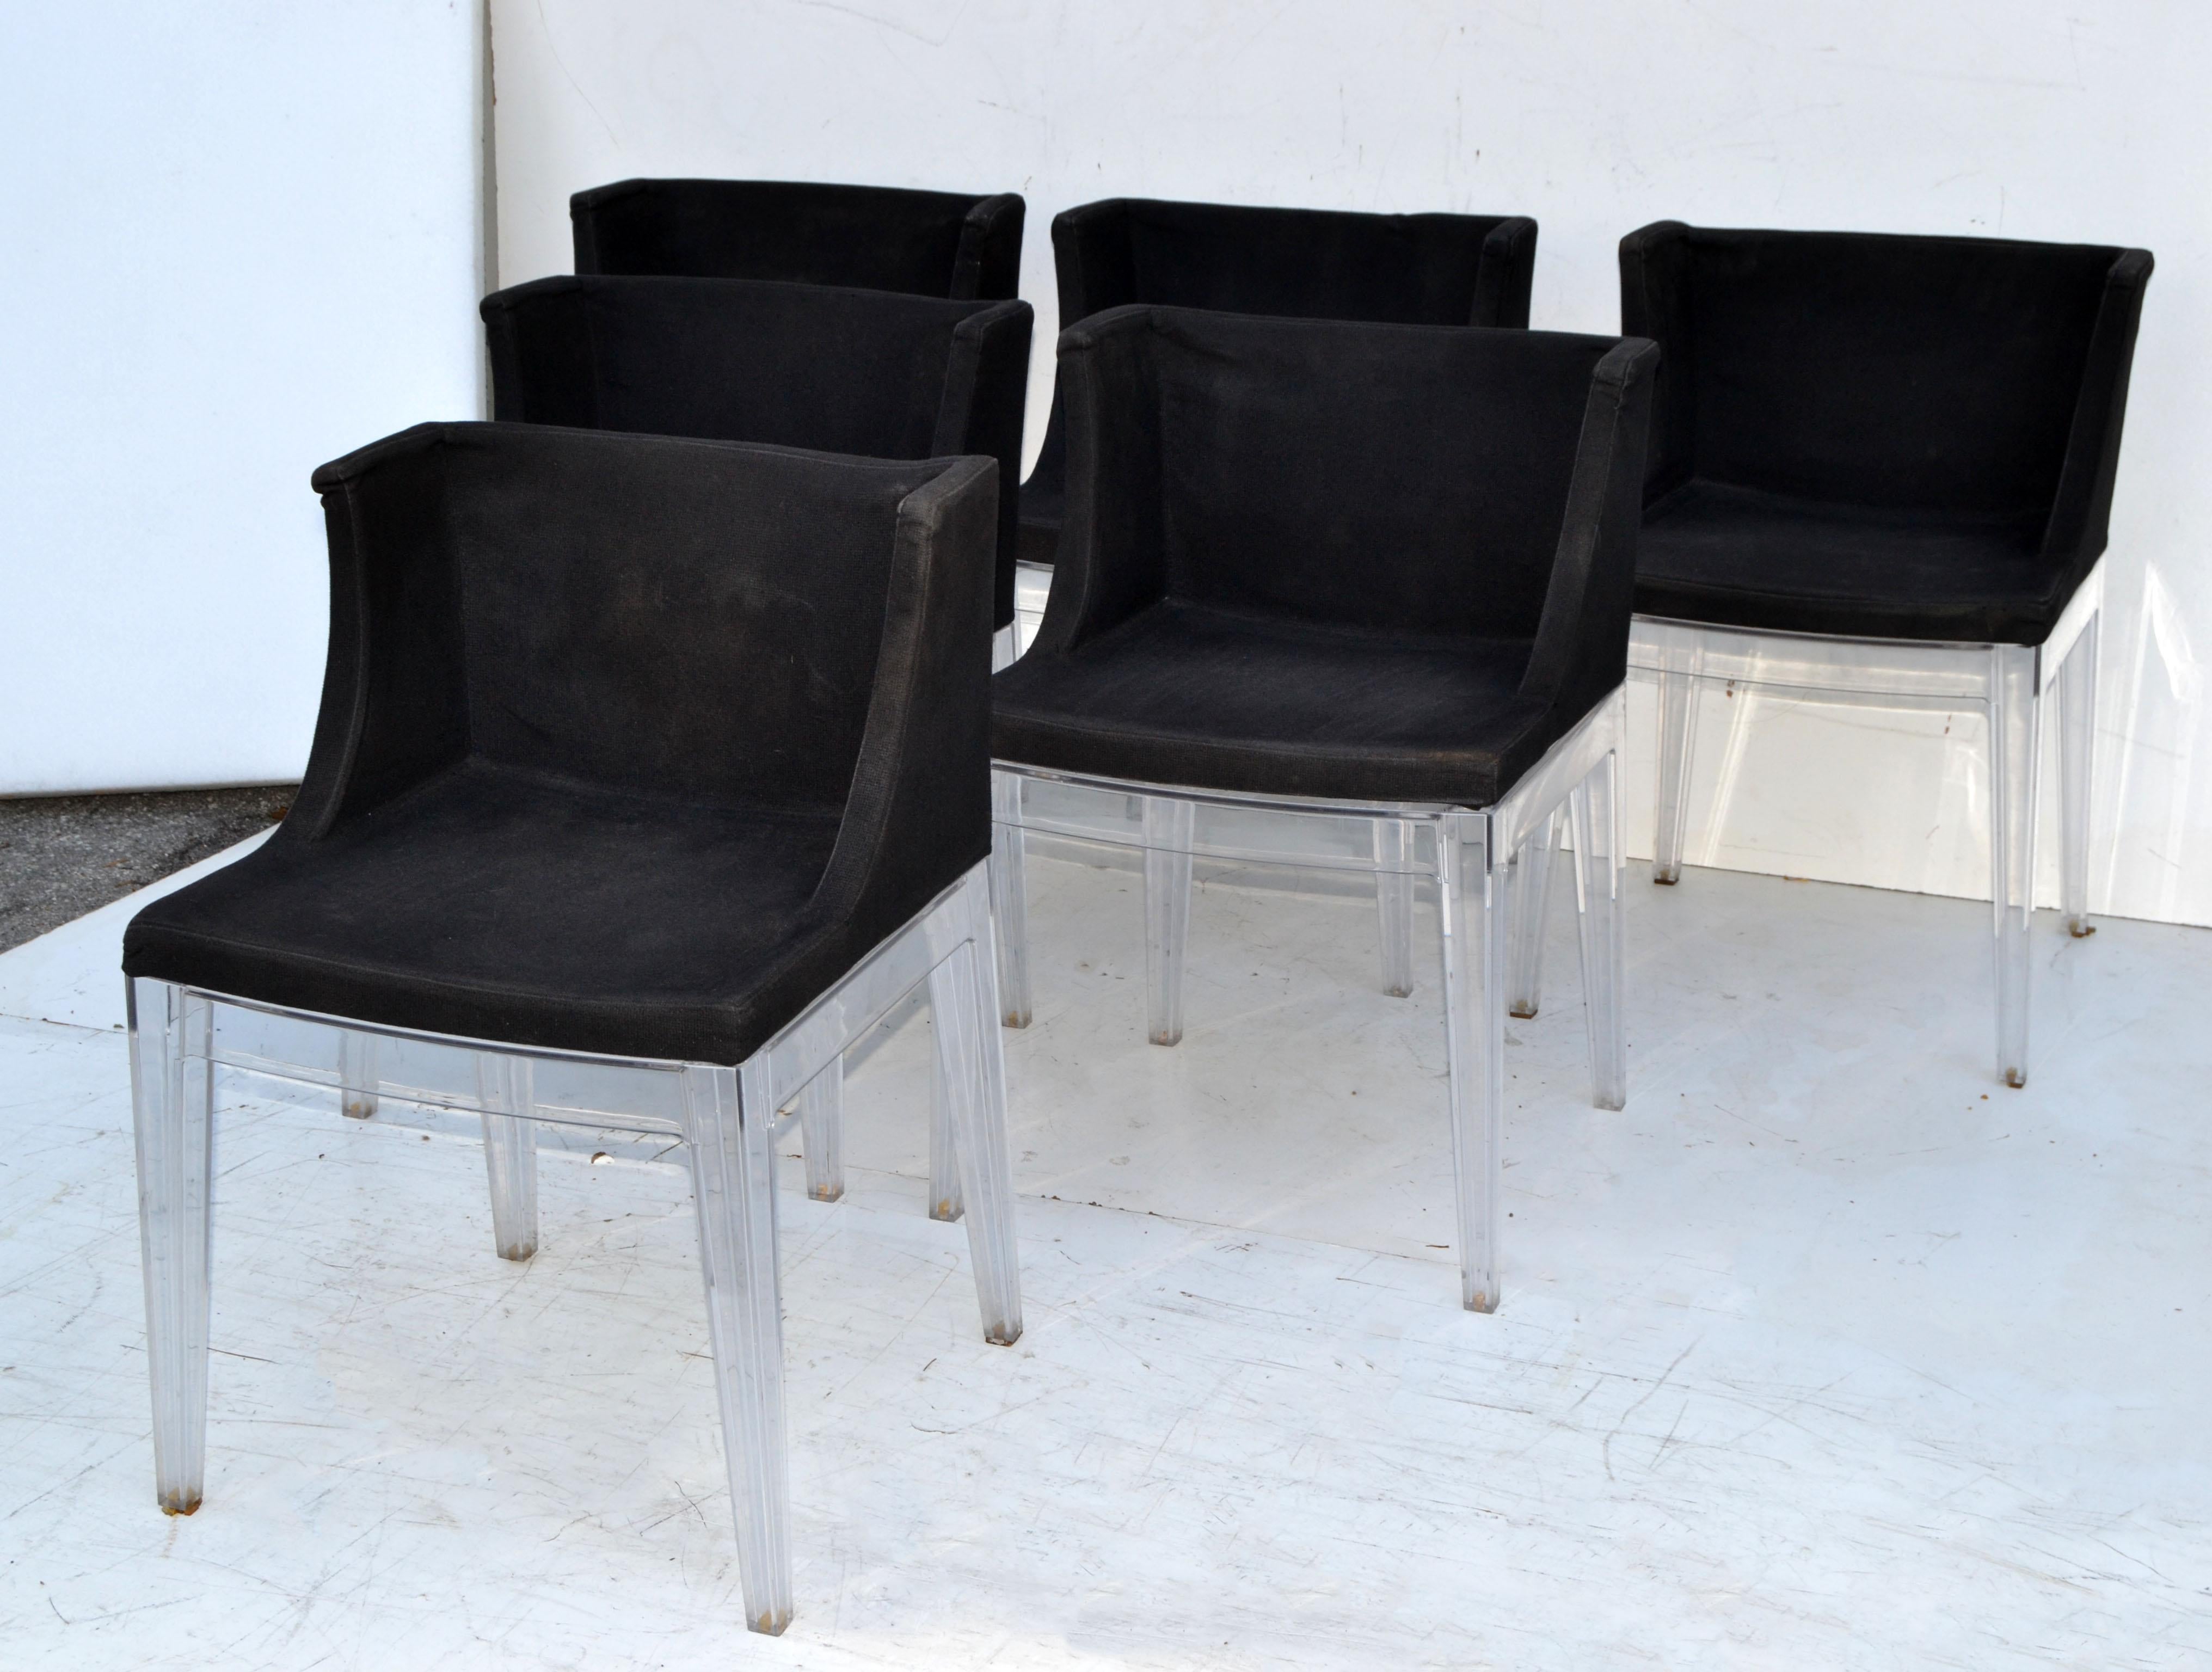 6 Kartell Italy Mademoiselle Chairs by Philippe Starck Black Fabric Lucite In Good Condition For Sale In Miami, FL